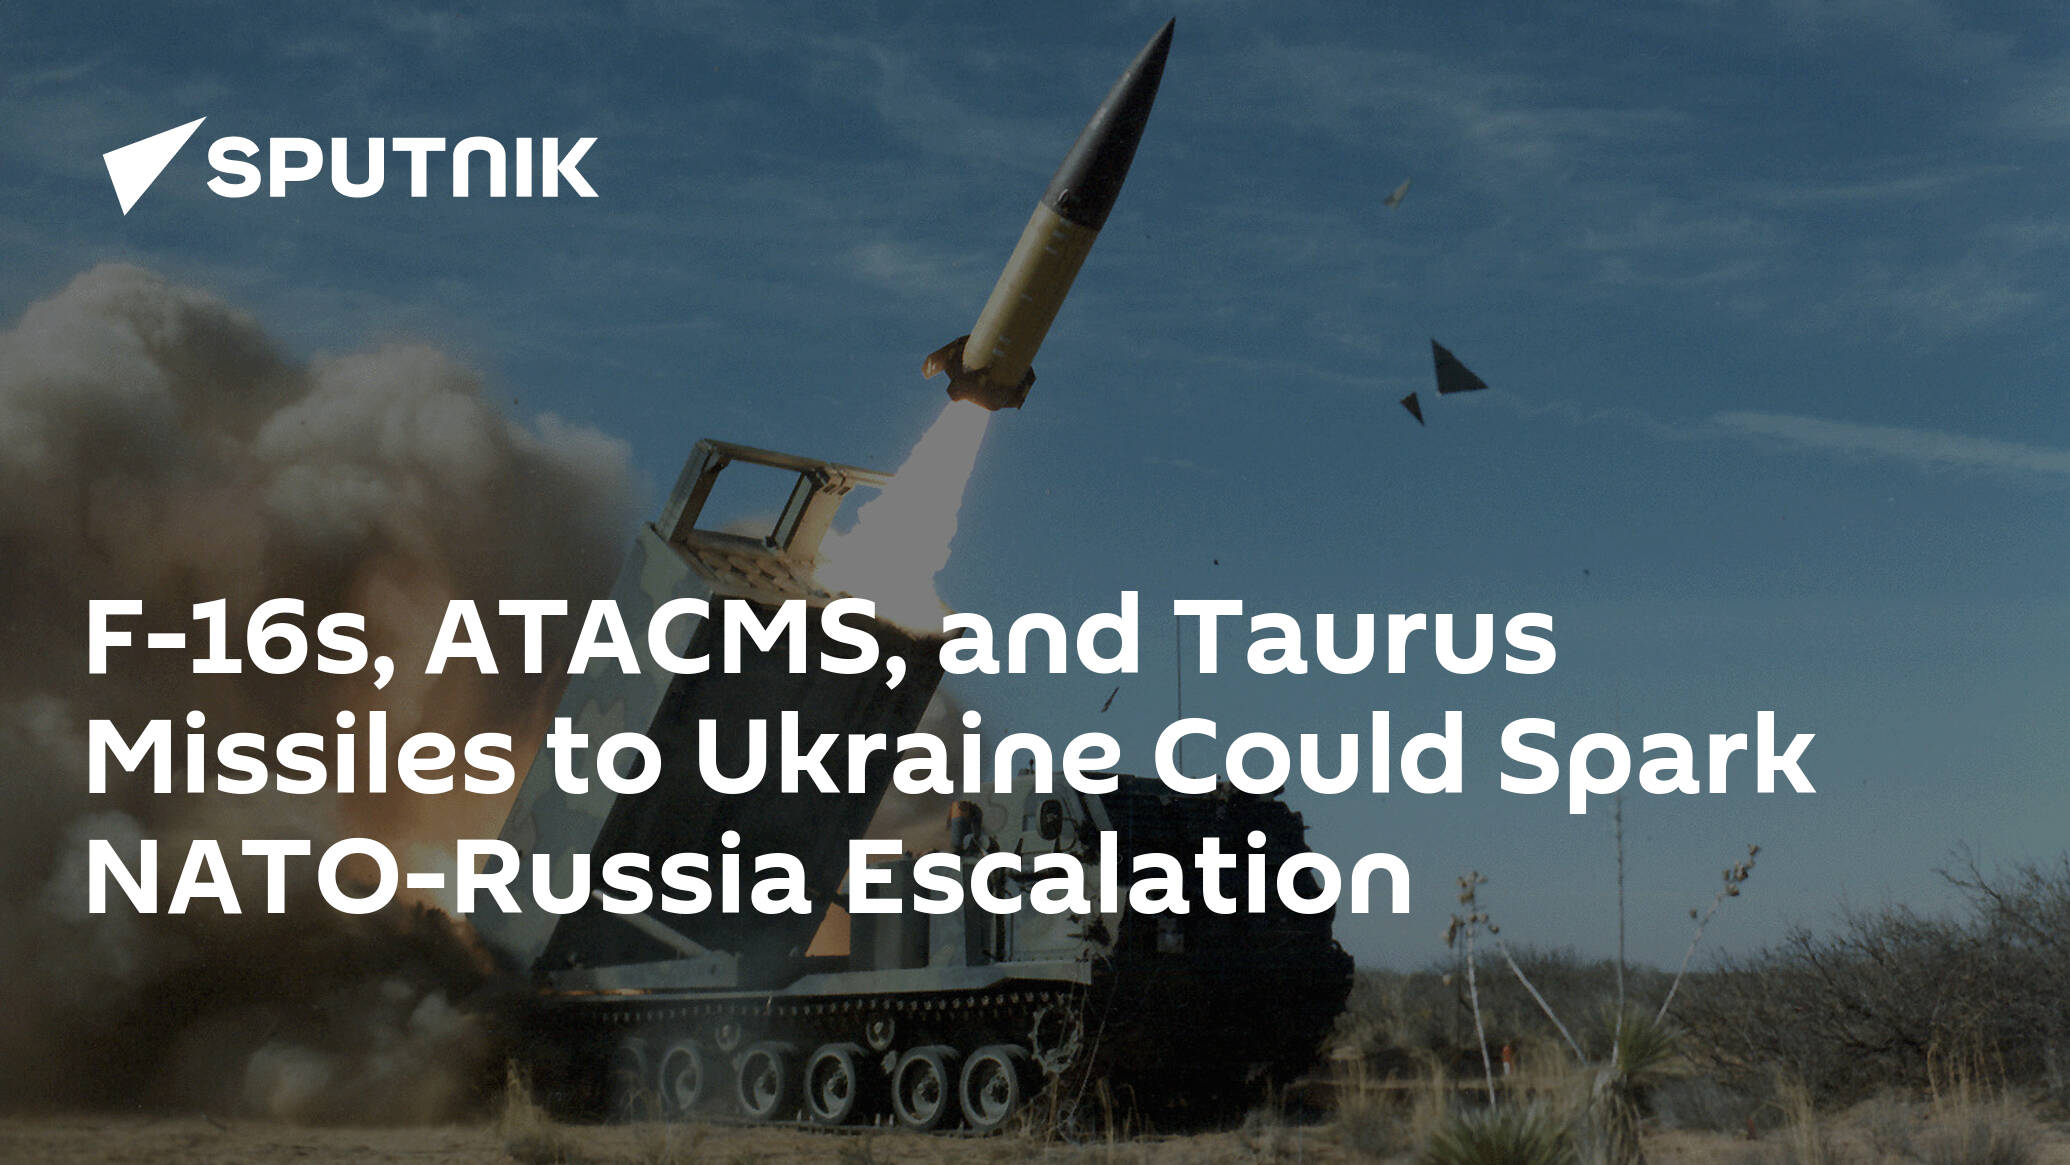 F-16s, ATACMS, and Taurus Missiles to Ukraine Could Spark NATO-Russia Escalation